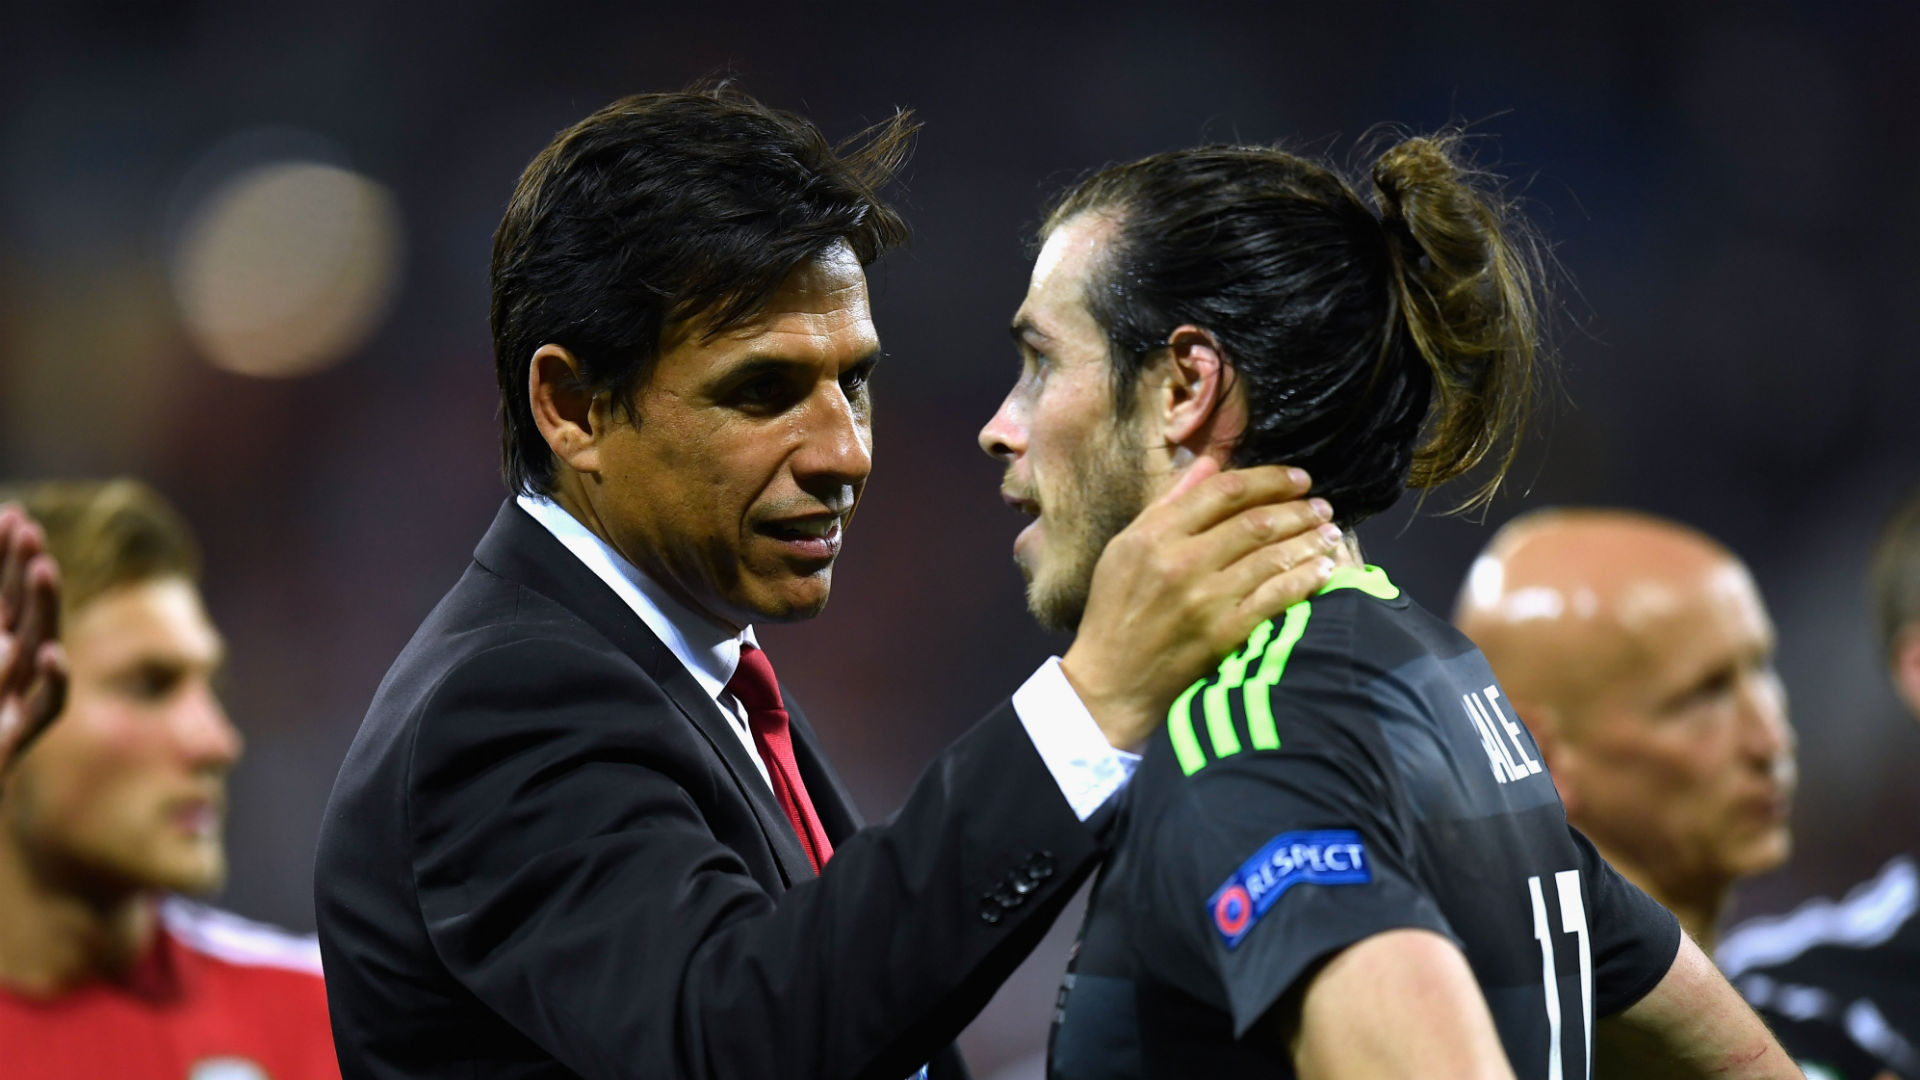 Garth Bale Thanks Chris Coleman After Wales Coach Steps Down